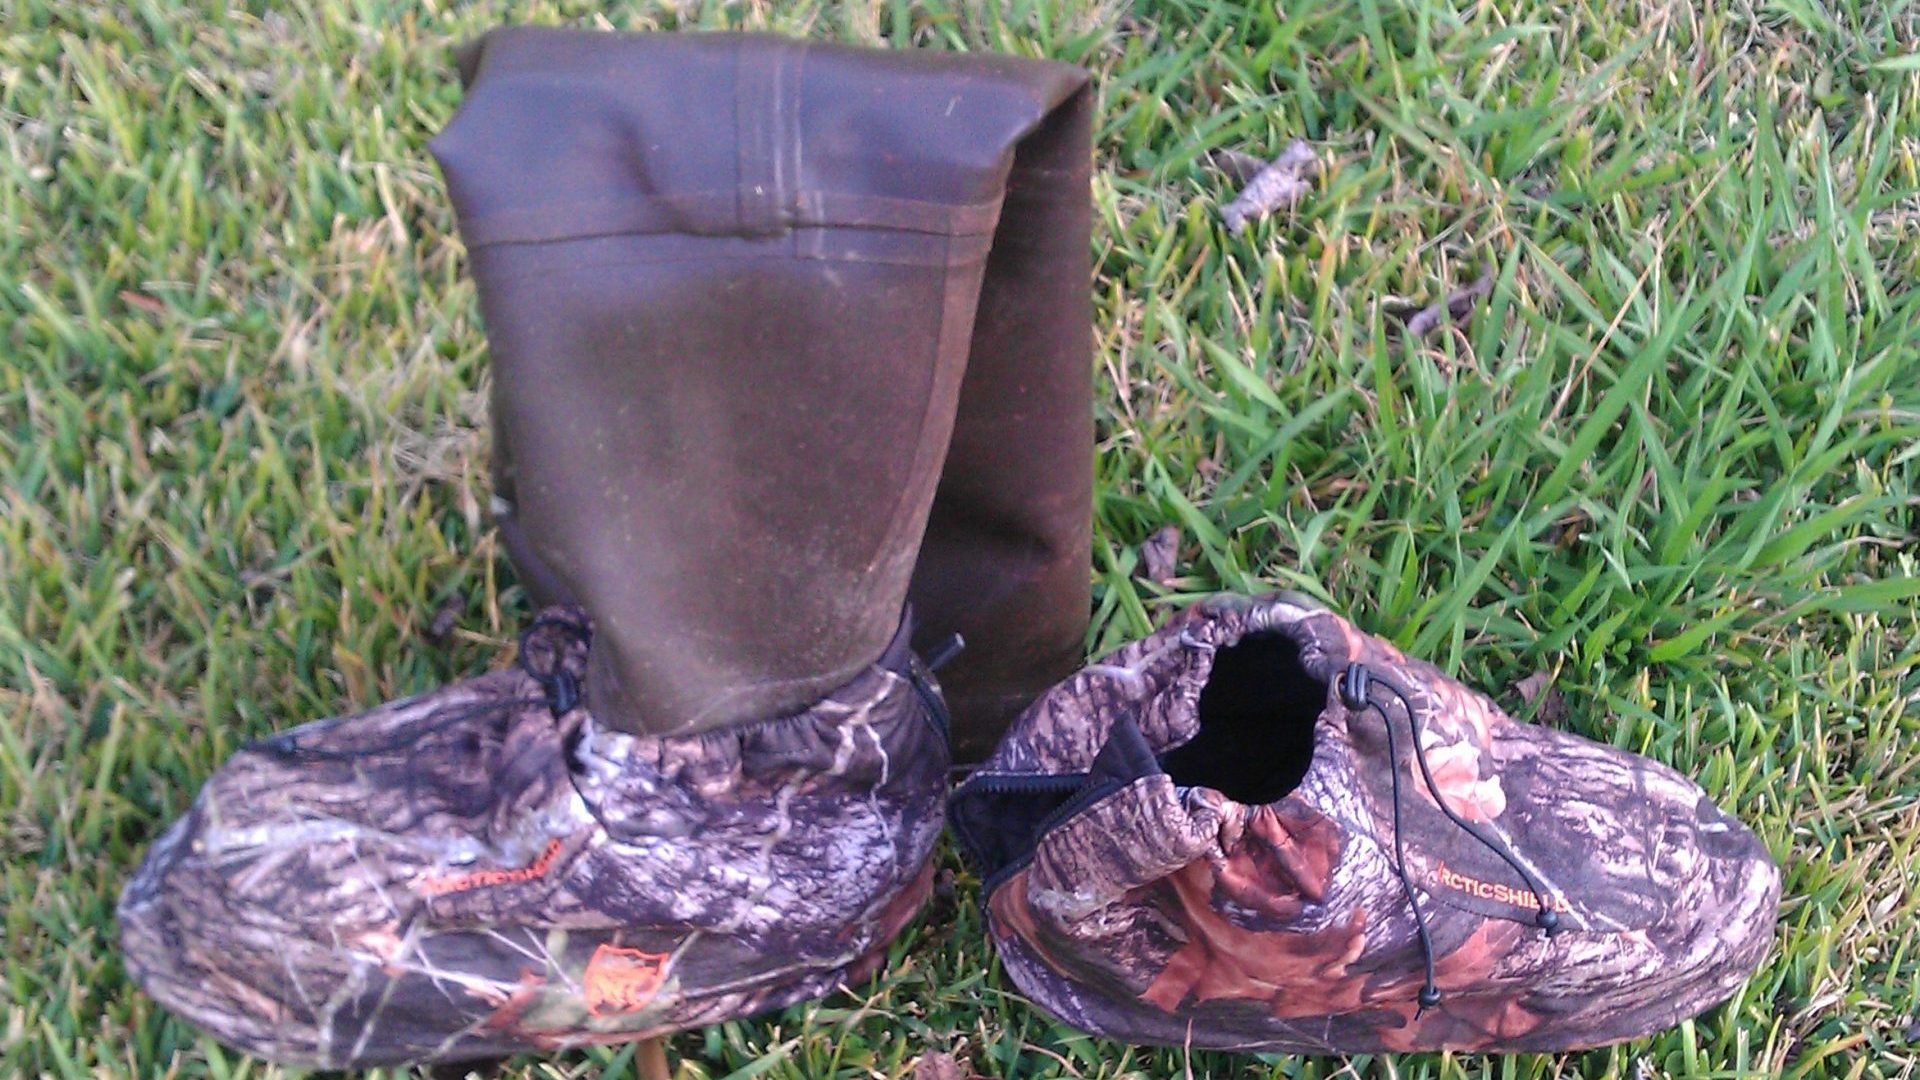 Is one type of boot material better for controlling scent